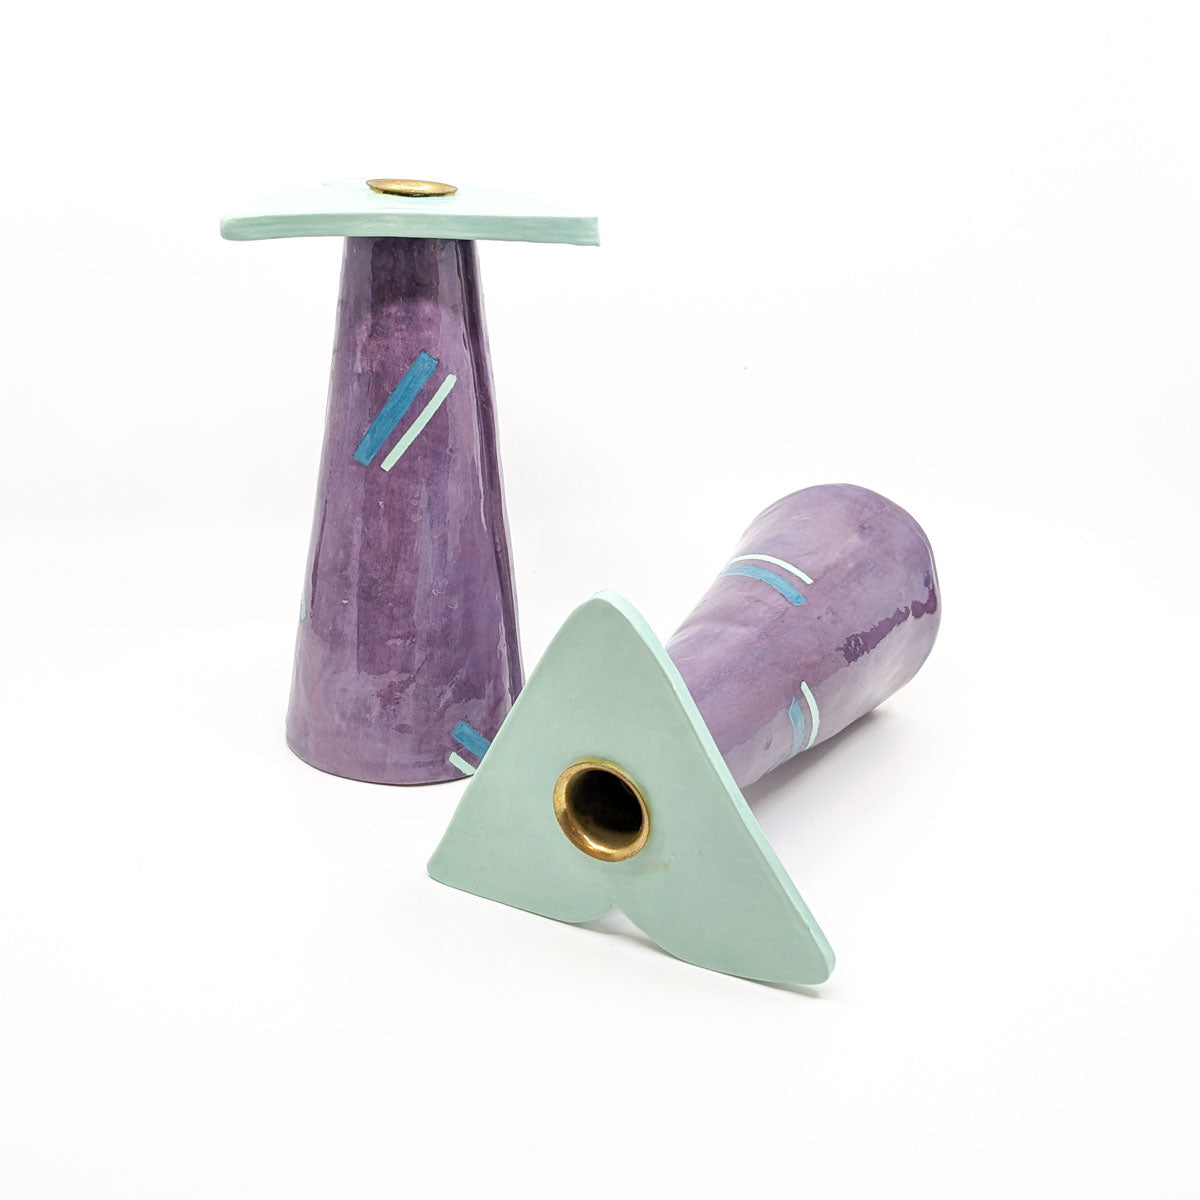 Candle Stick Holders in Purple with Green Top